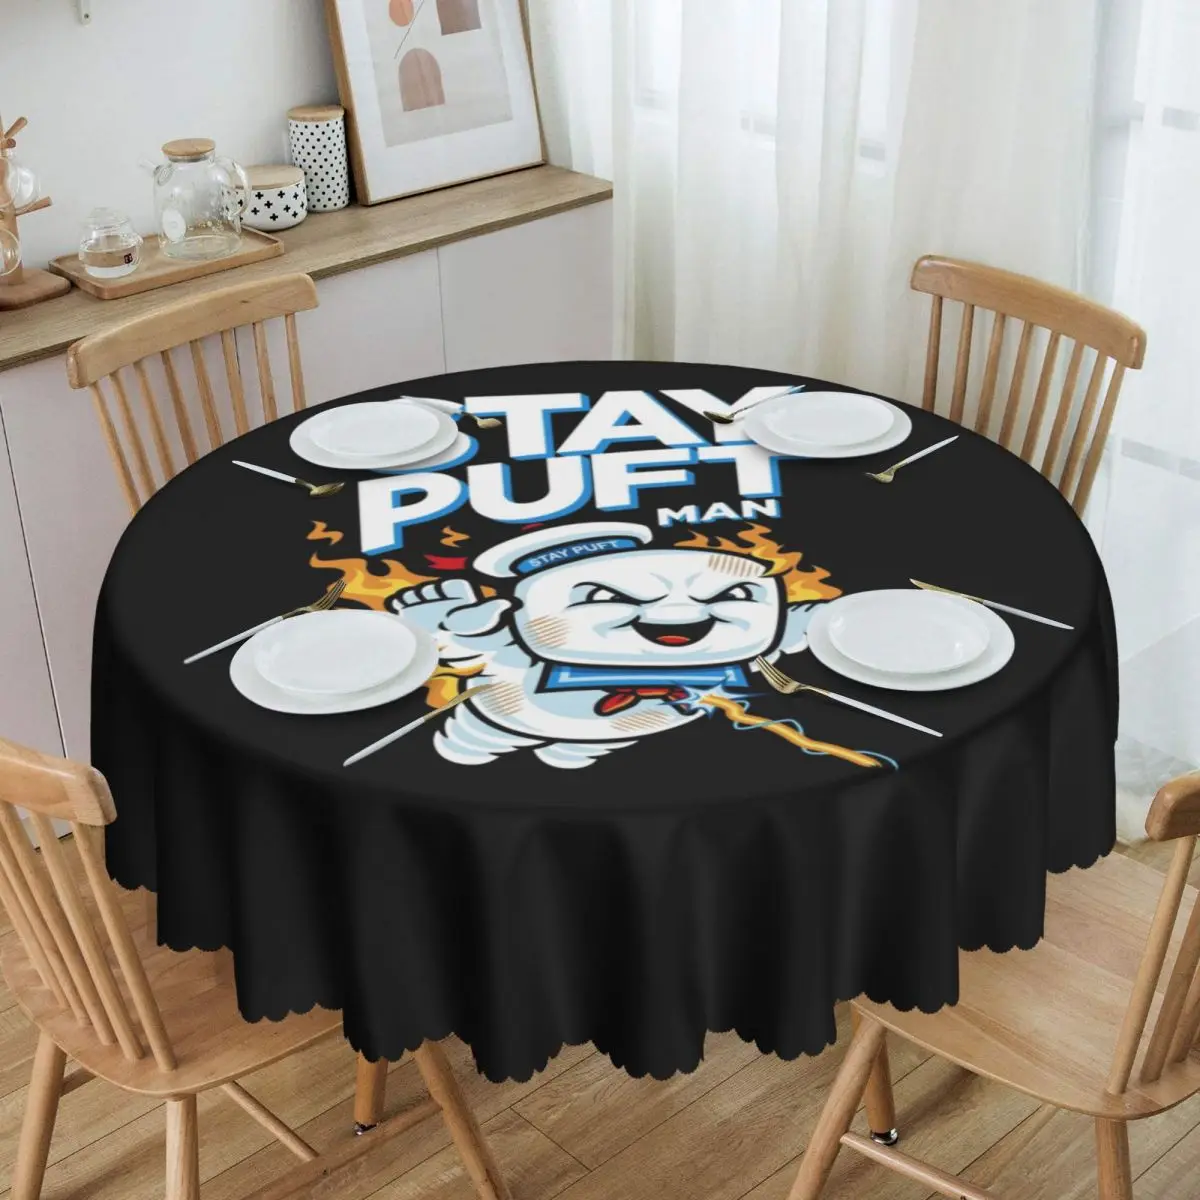 

Ghostbusters Stay-Puft Marshmallow Man Tablecloth Round Waterproof Comic Movie Table Cover Cloth for Party 60 inches